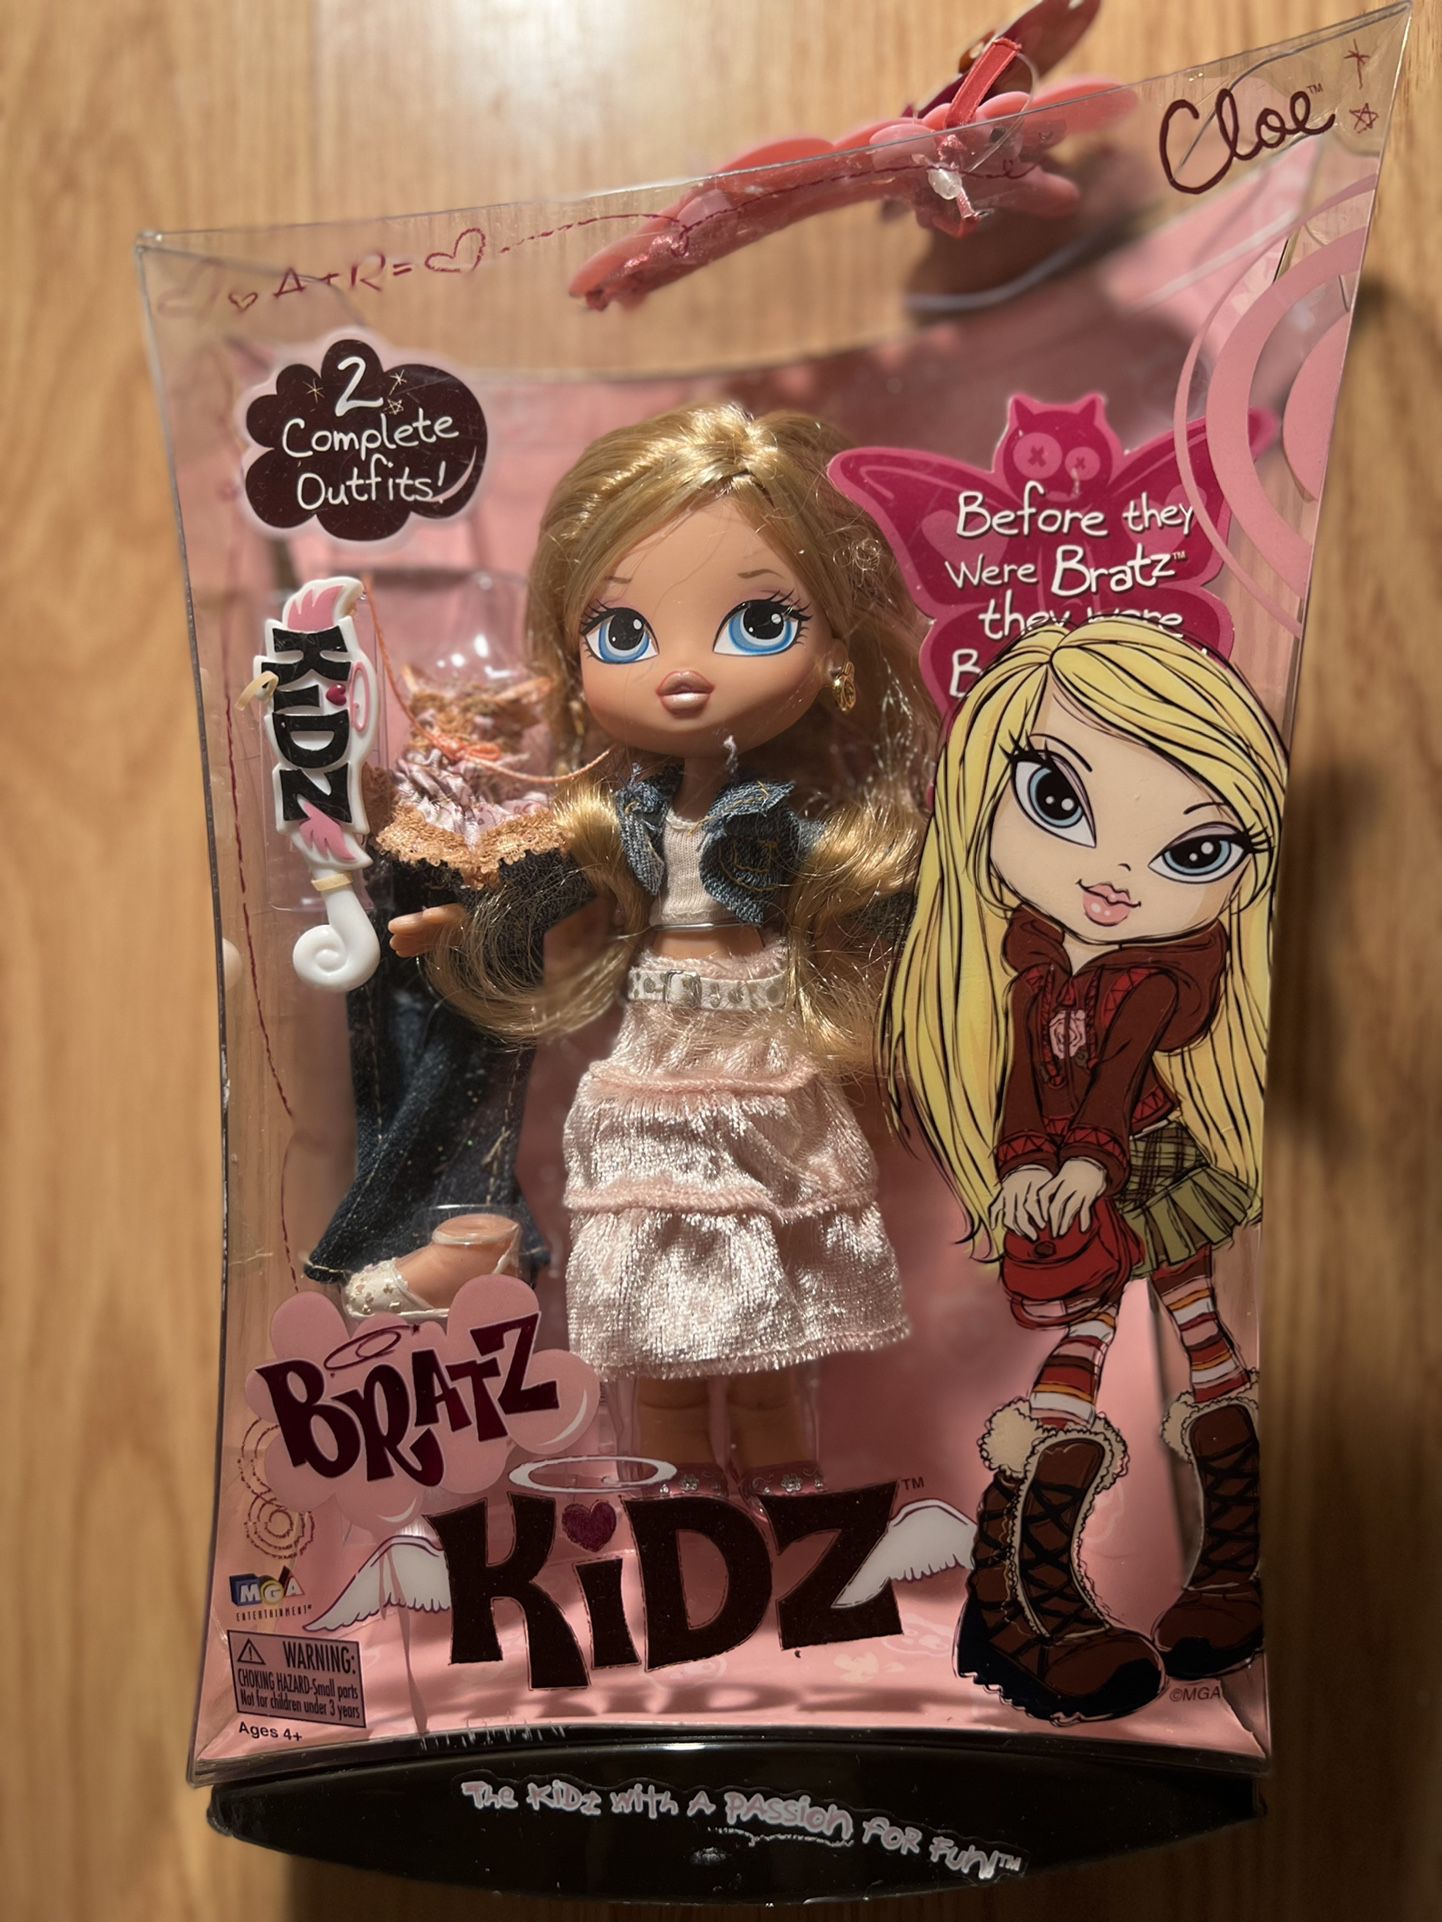 BRATZ KIDZ CLOE Retired Doll New In Box Toy MGA Includes 2 Complete Outfits 